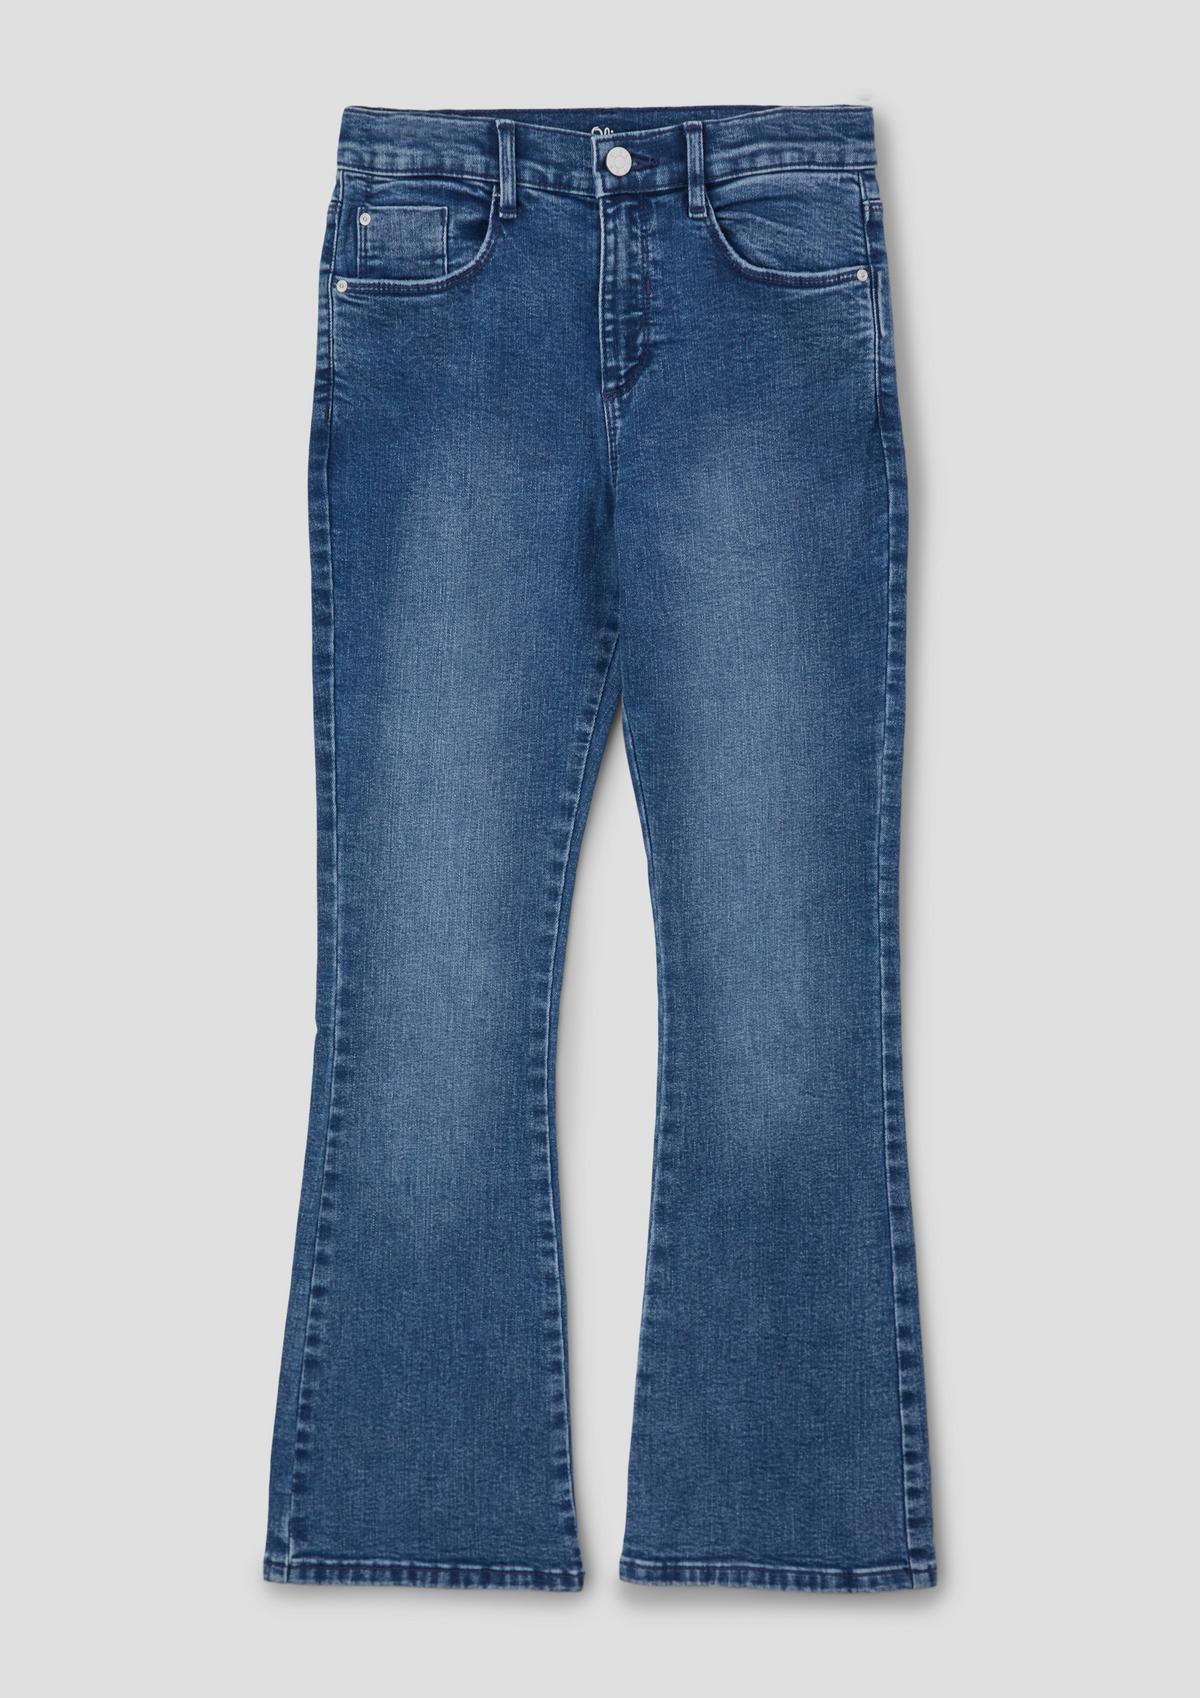 s.Oliver Jeans Beverly / relaxed fit / high rise / flared leg / in de wijdte verstelbaar